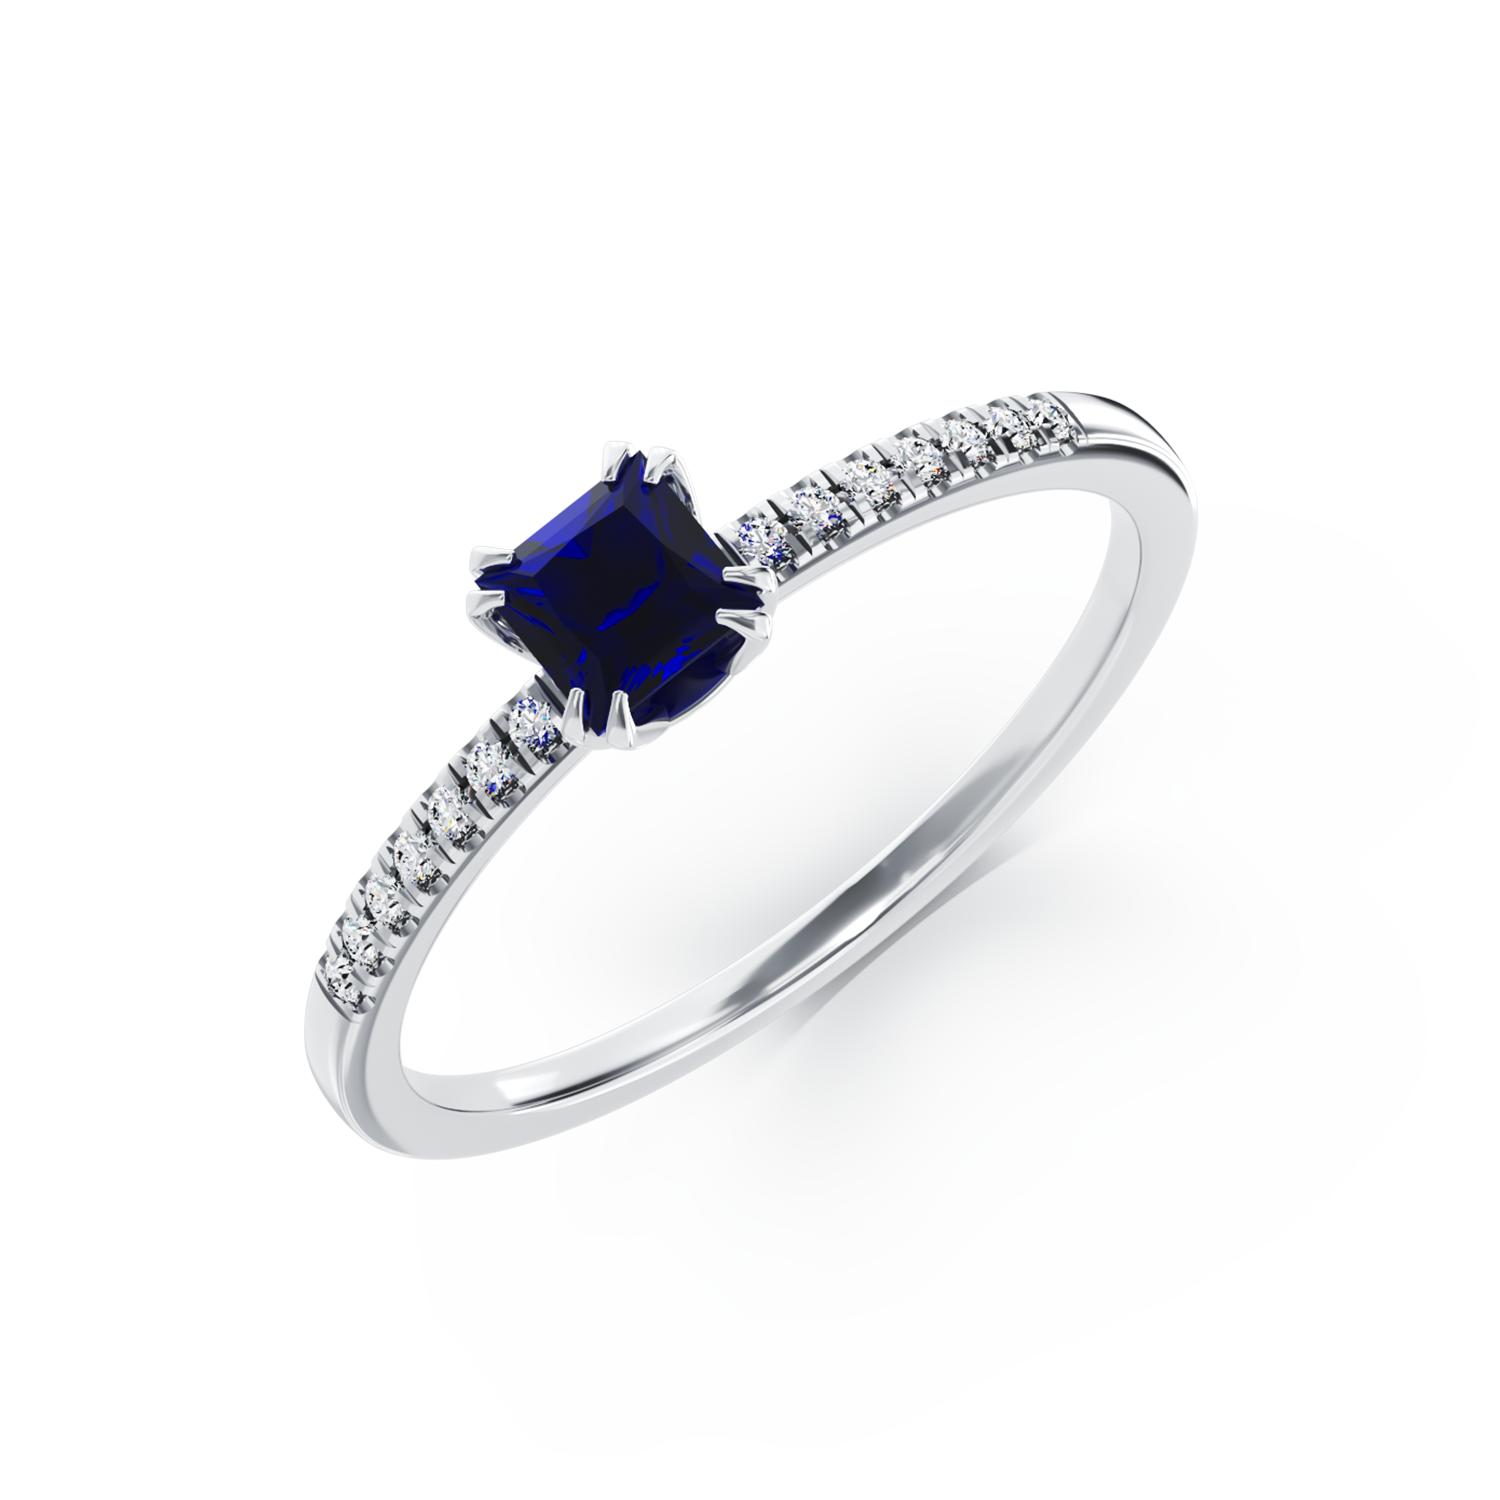 18K white gold engagement ring with 0.32ct iolite and 0.06ct diamonds